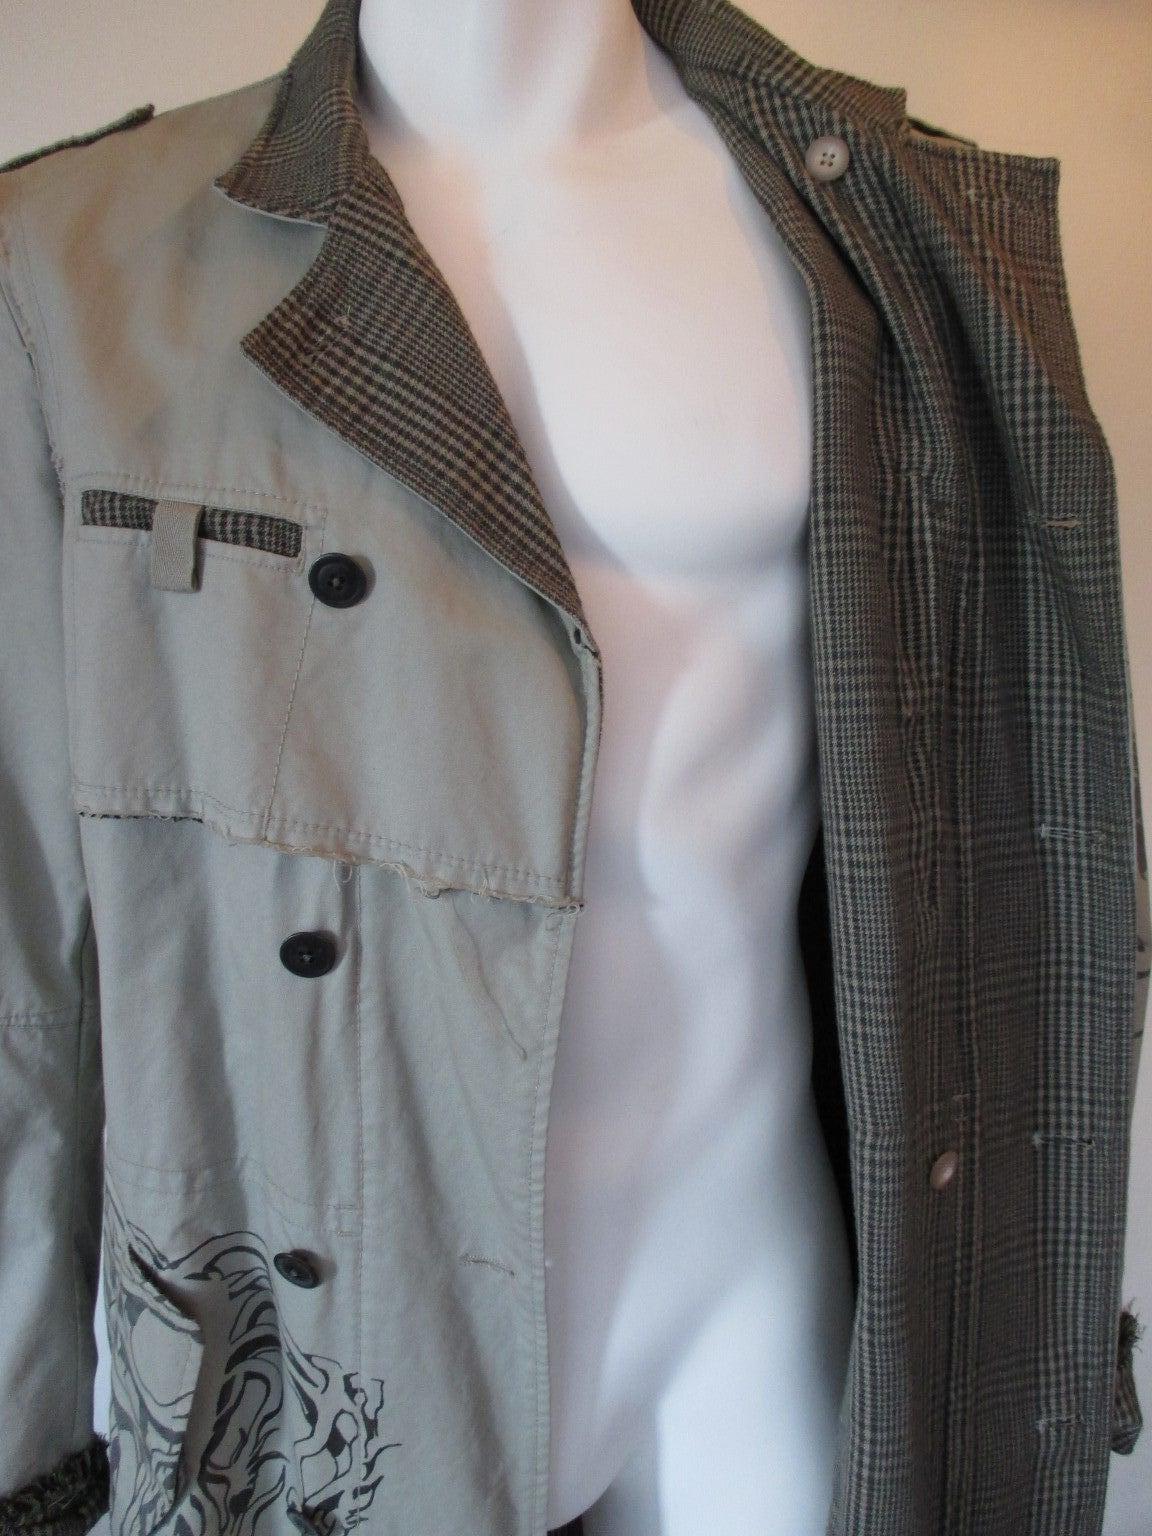 Designer coat from Marithe Francois Girbaud, made in France.
Color is grey/green
Material is cotton
double breasted
The coat has a silk wool blend Prince of Wales check lining
and has a printed design.
Please note that vintage items are not new and